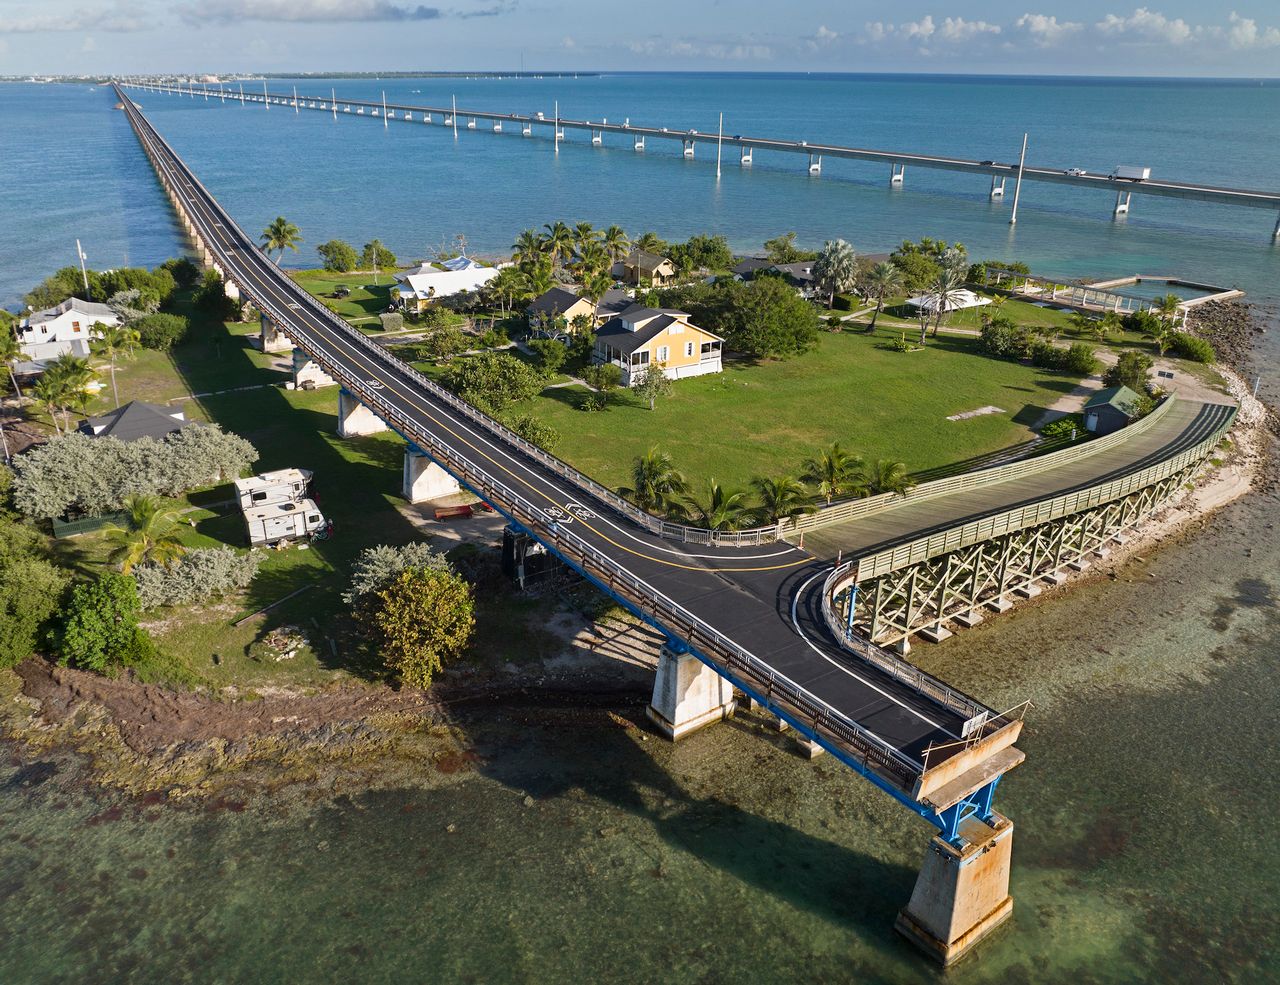 The project to fully rehabilitate and restore the 2.2-mile section of the bridge that connects Marathon to historic Pigeon Key began Sept. 30, 2017.